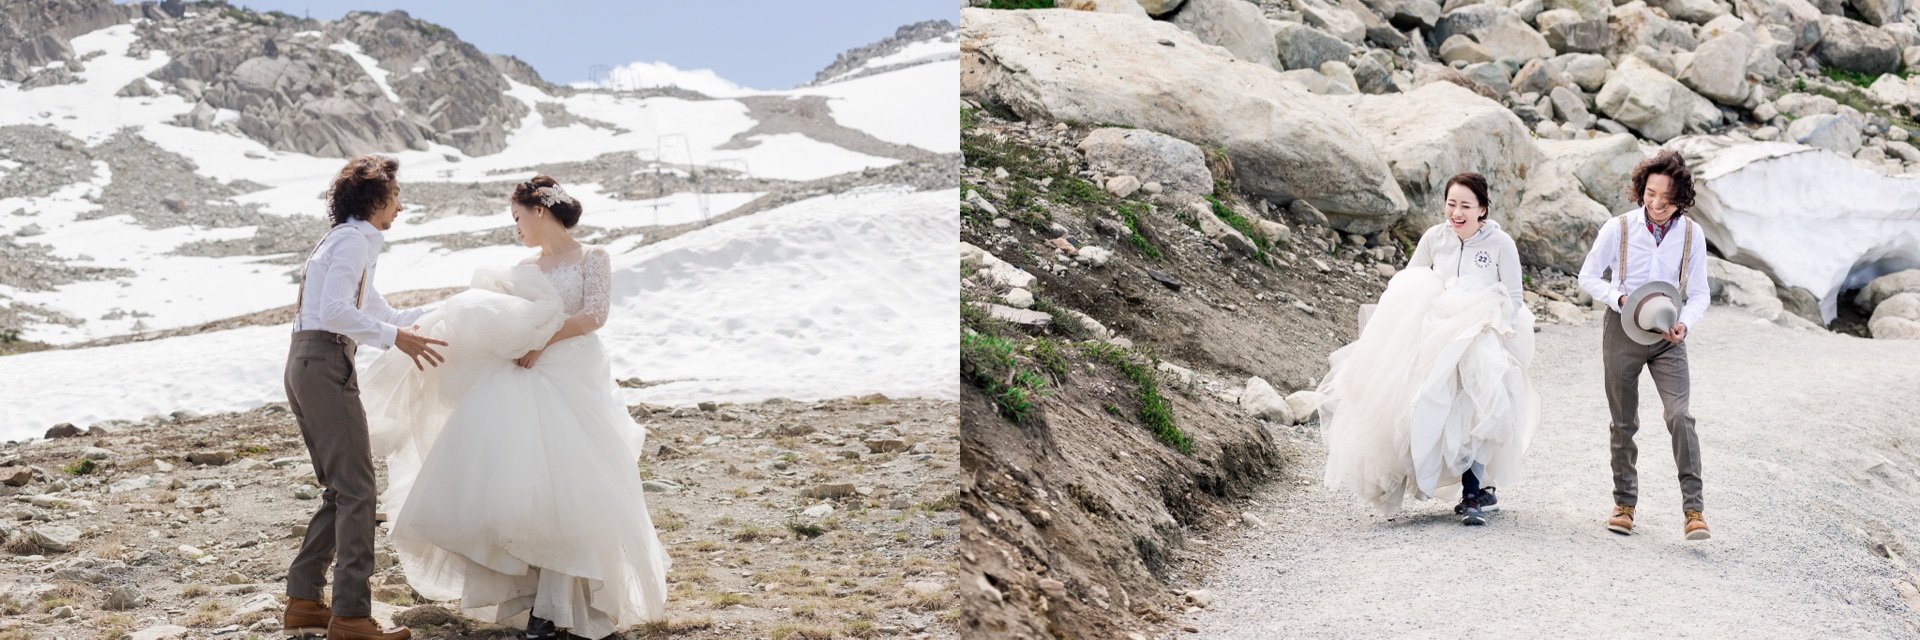 3_what is an adventure elopement 7_what is an adventure elopement 4_2 day mountain adventure elopement ideas.jpg